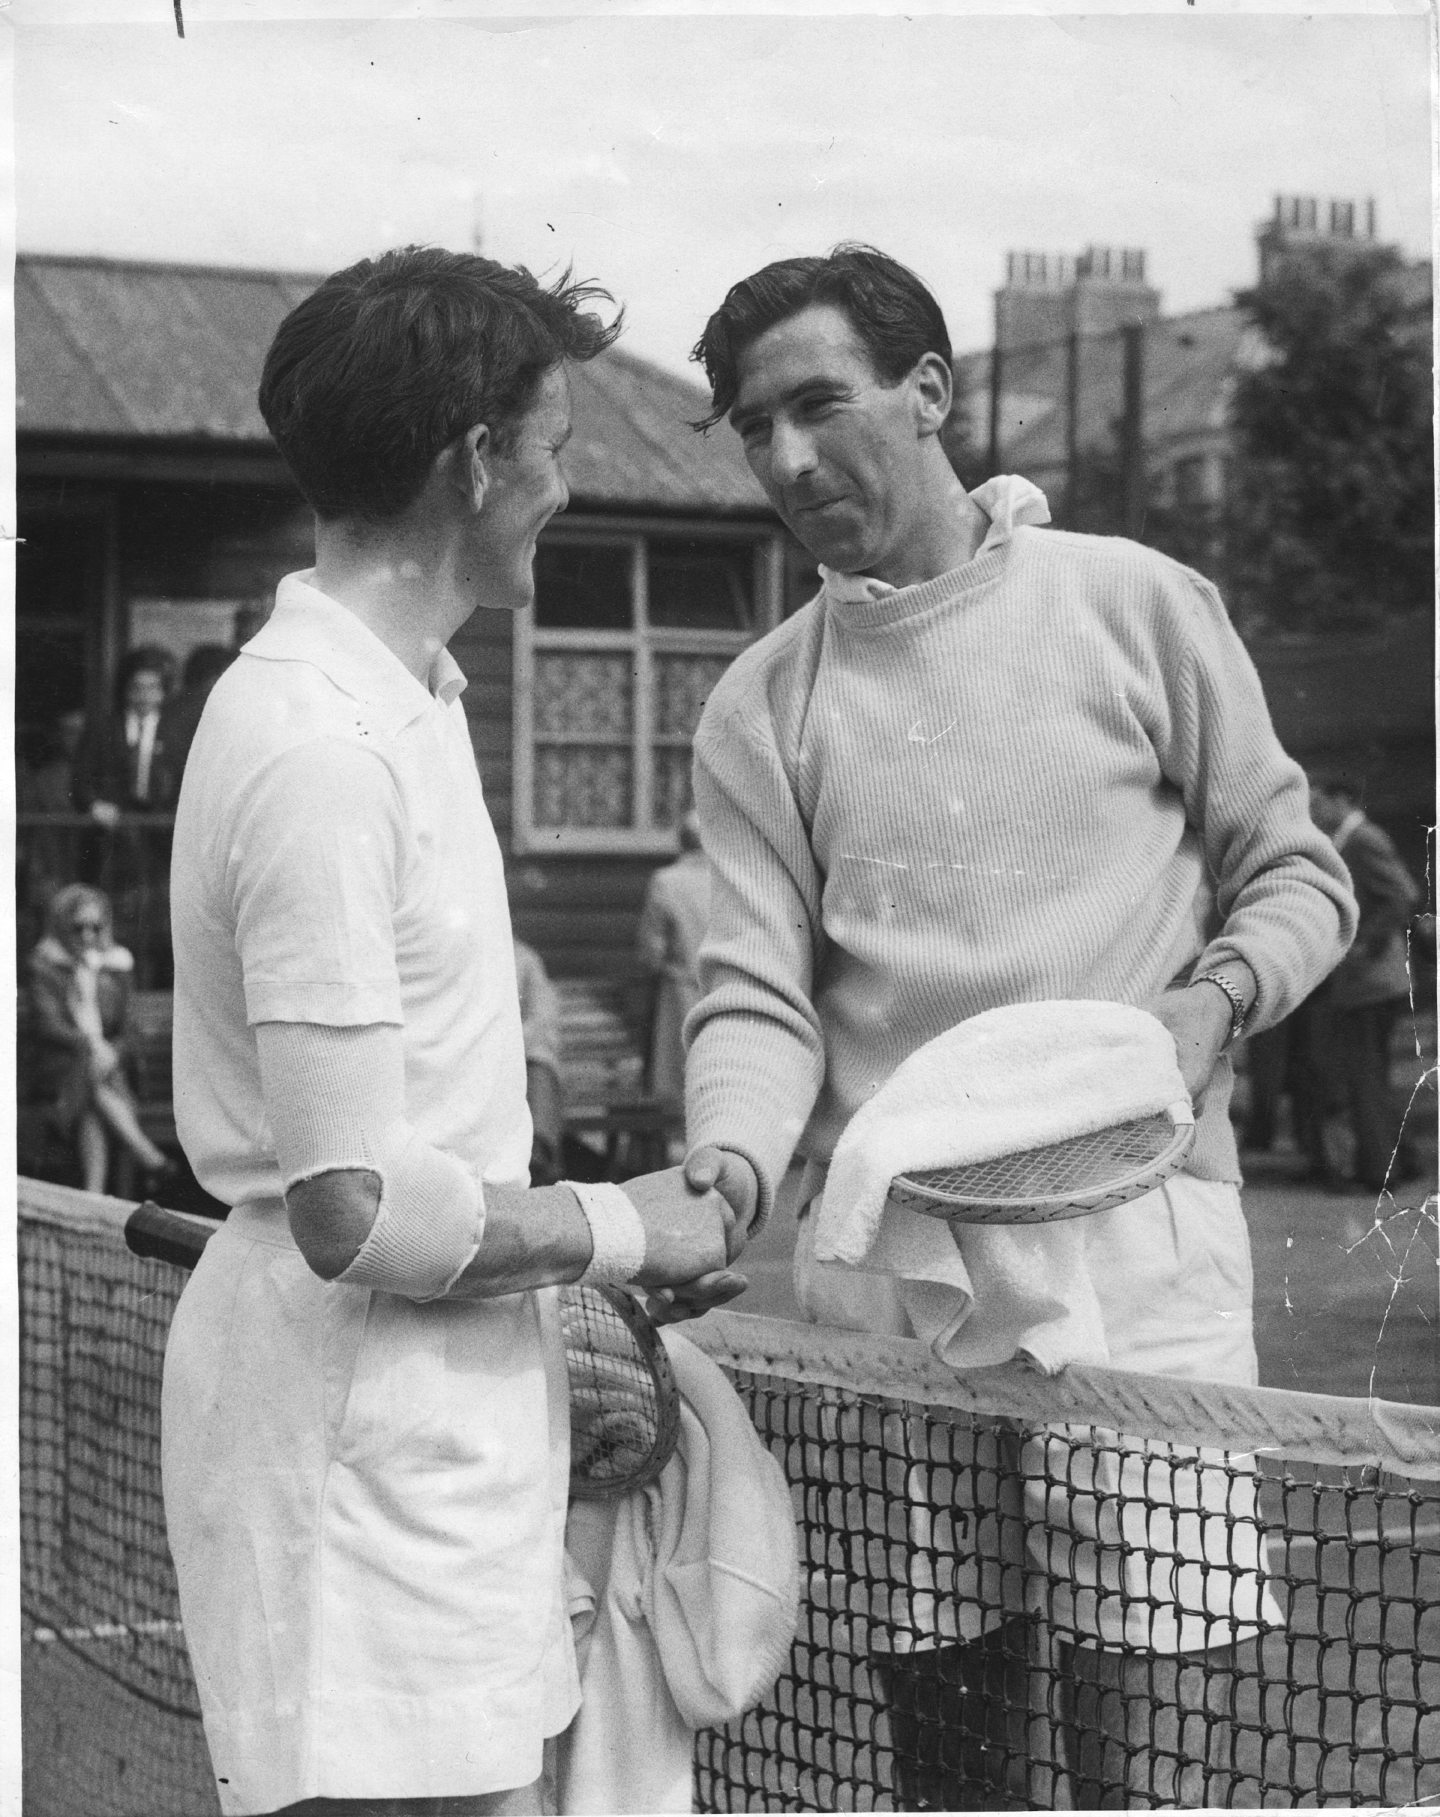 George won the North-East of Scotland Singles championship at the Four Courts Tournament in 1956.